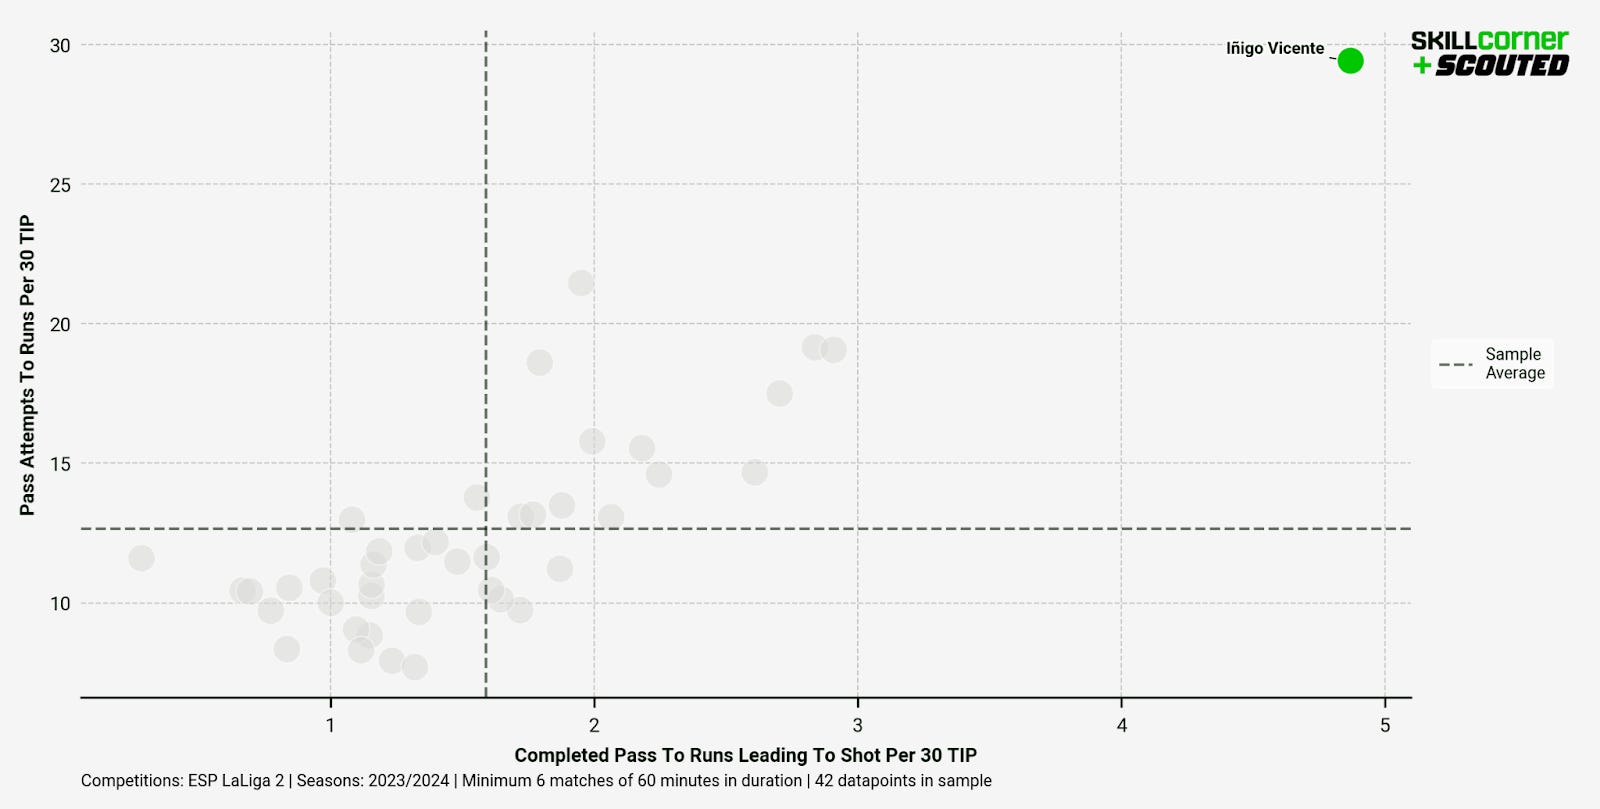 A SCOUT x SkillCorner graph plotting Pass Attempts to Runs Per 30 TIP against Completed Pass to Runs Leading to Short per 30 TIP among all Segunda División forwards in the 2023/24 season.